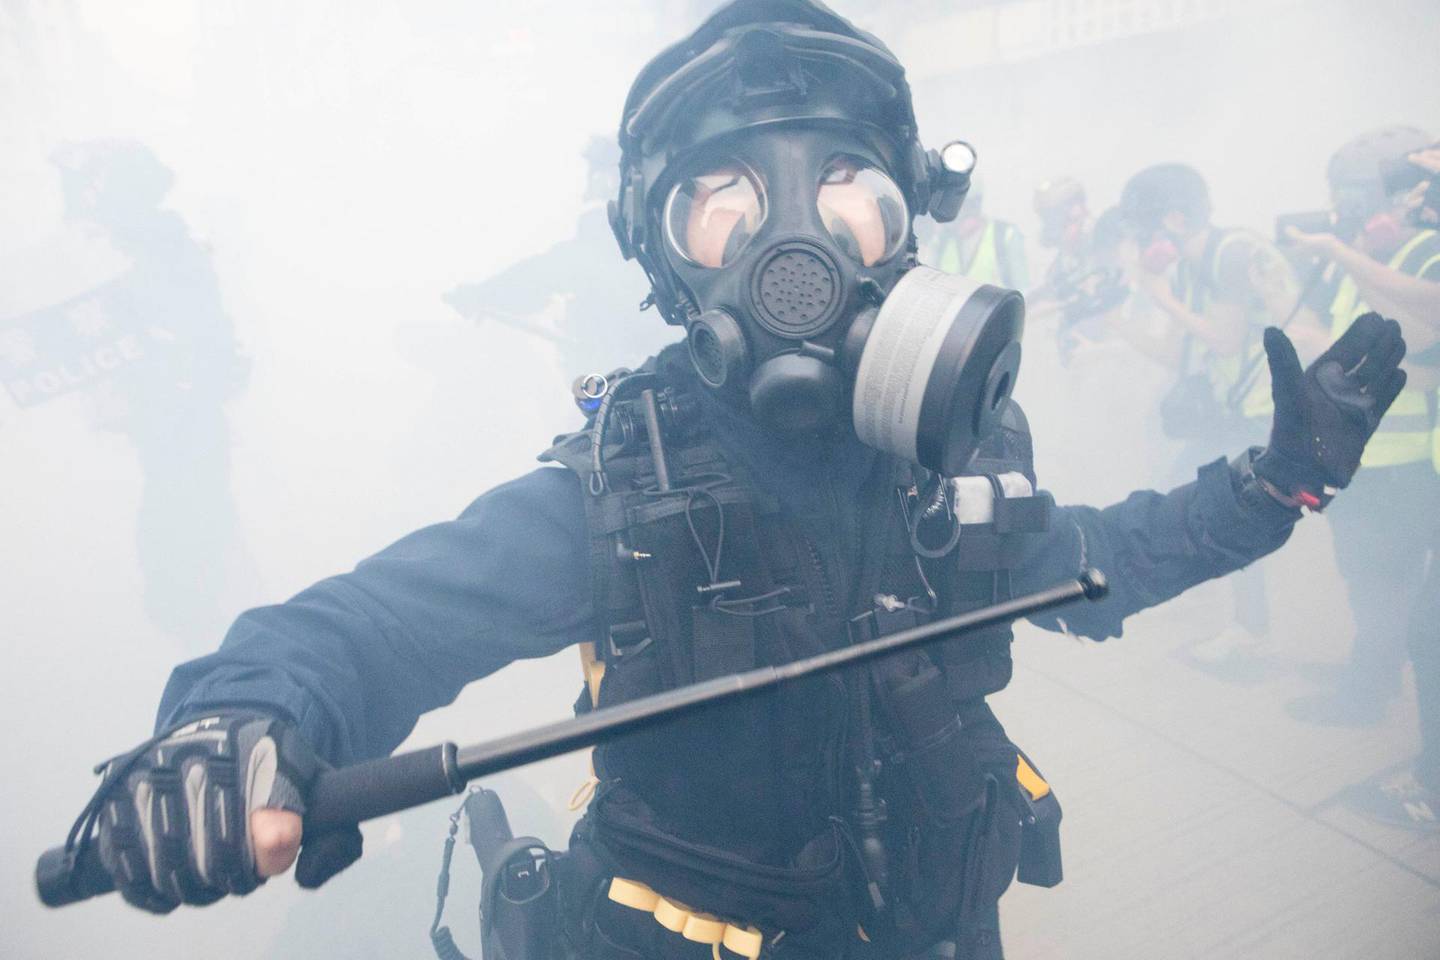 A member of the Hong Kong riot police during clashes in the Mong Kok area of Hong Kong. Rick Findler for The National